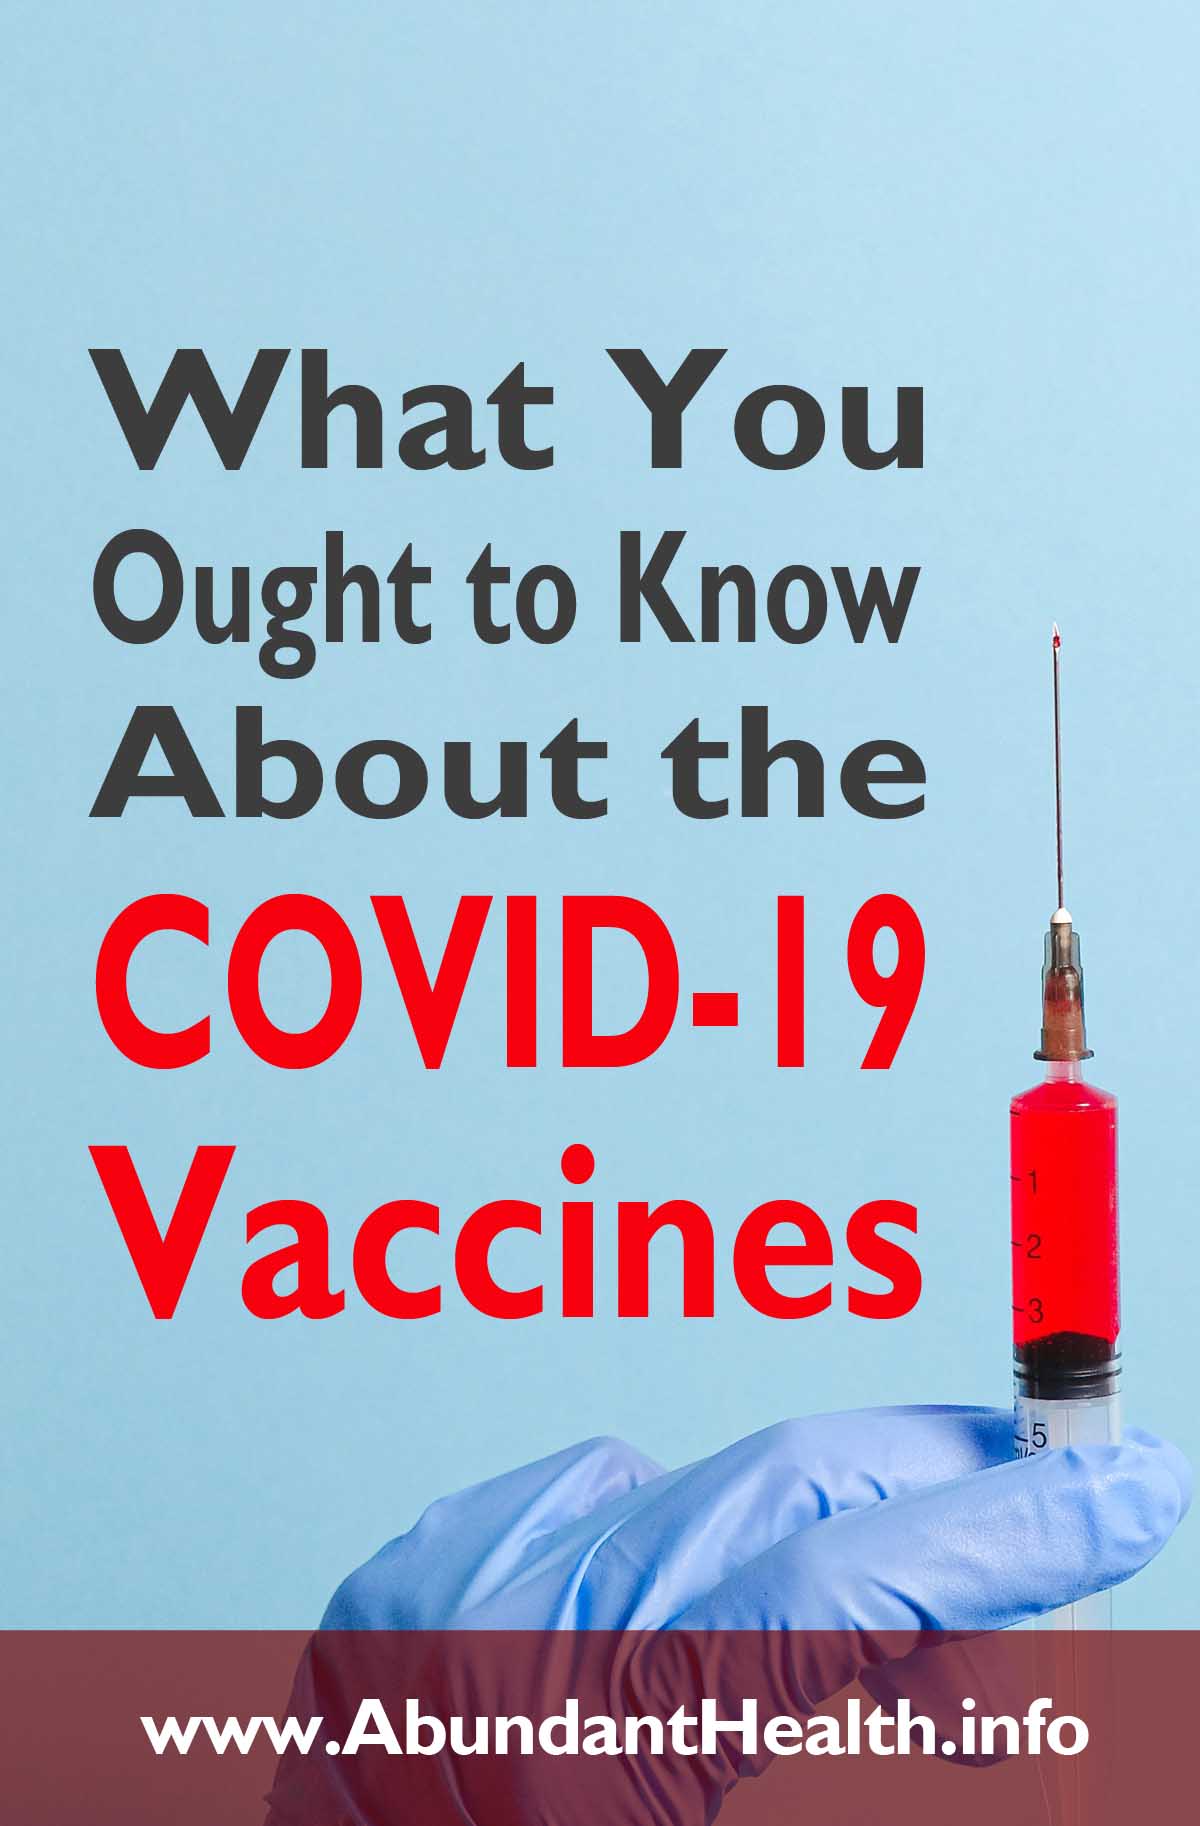 What You Ought to Know about the COVID-19 Vaccines